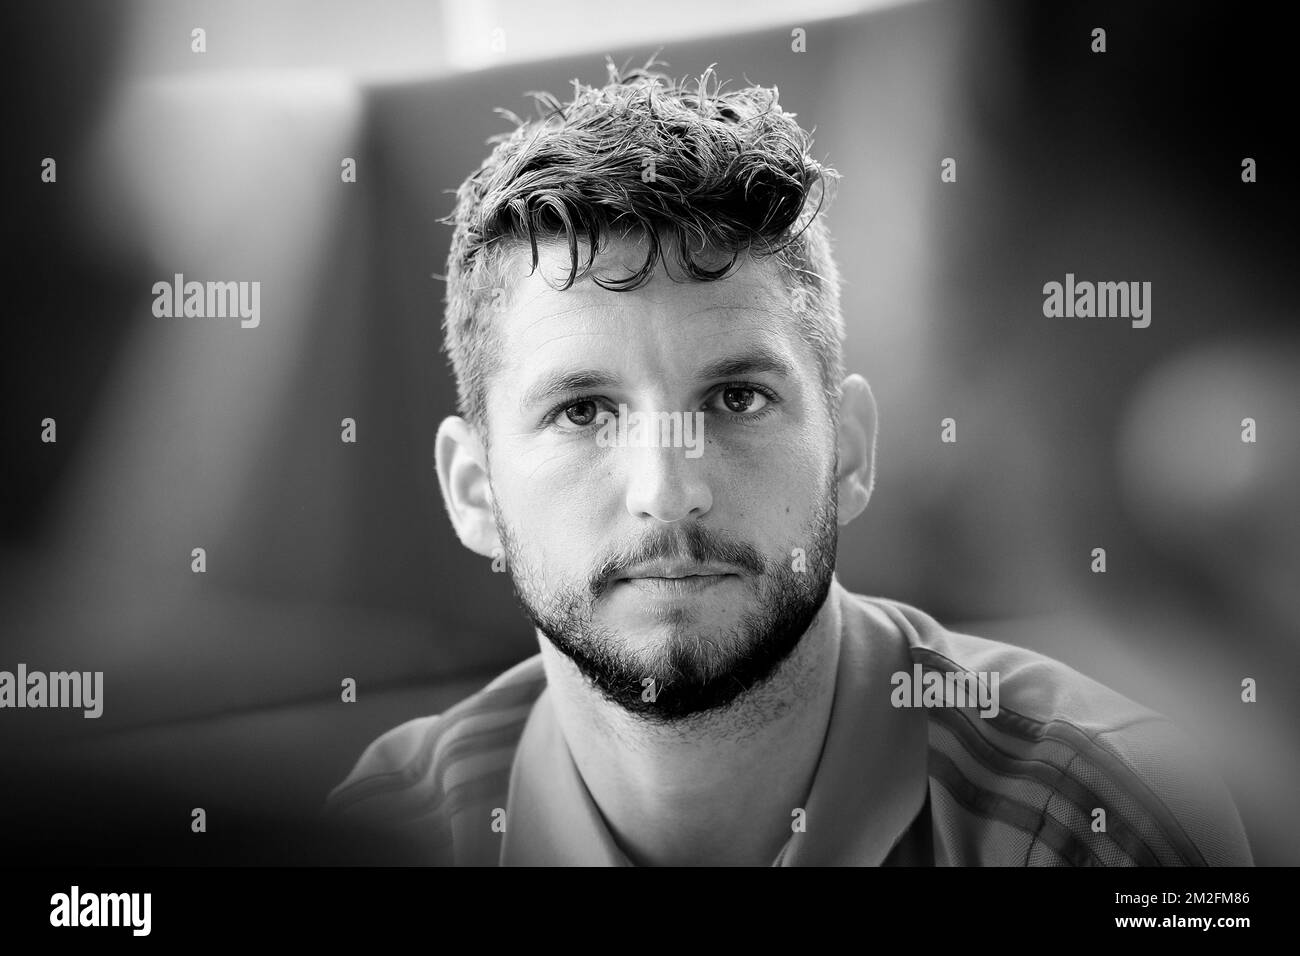 Belgium's Dries Mertens pictured during a press conference of the Belgian national soccer team Red Devils, Tuesday 29 May 2018, in Tubize. The Red Devils started their preparations for the upcoming FIFA World Cup 2018 in Russia. BELGA PHOTO BRUNO FAHY Stock Photo